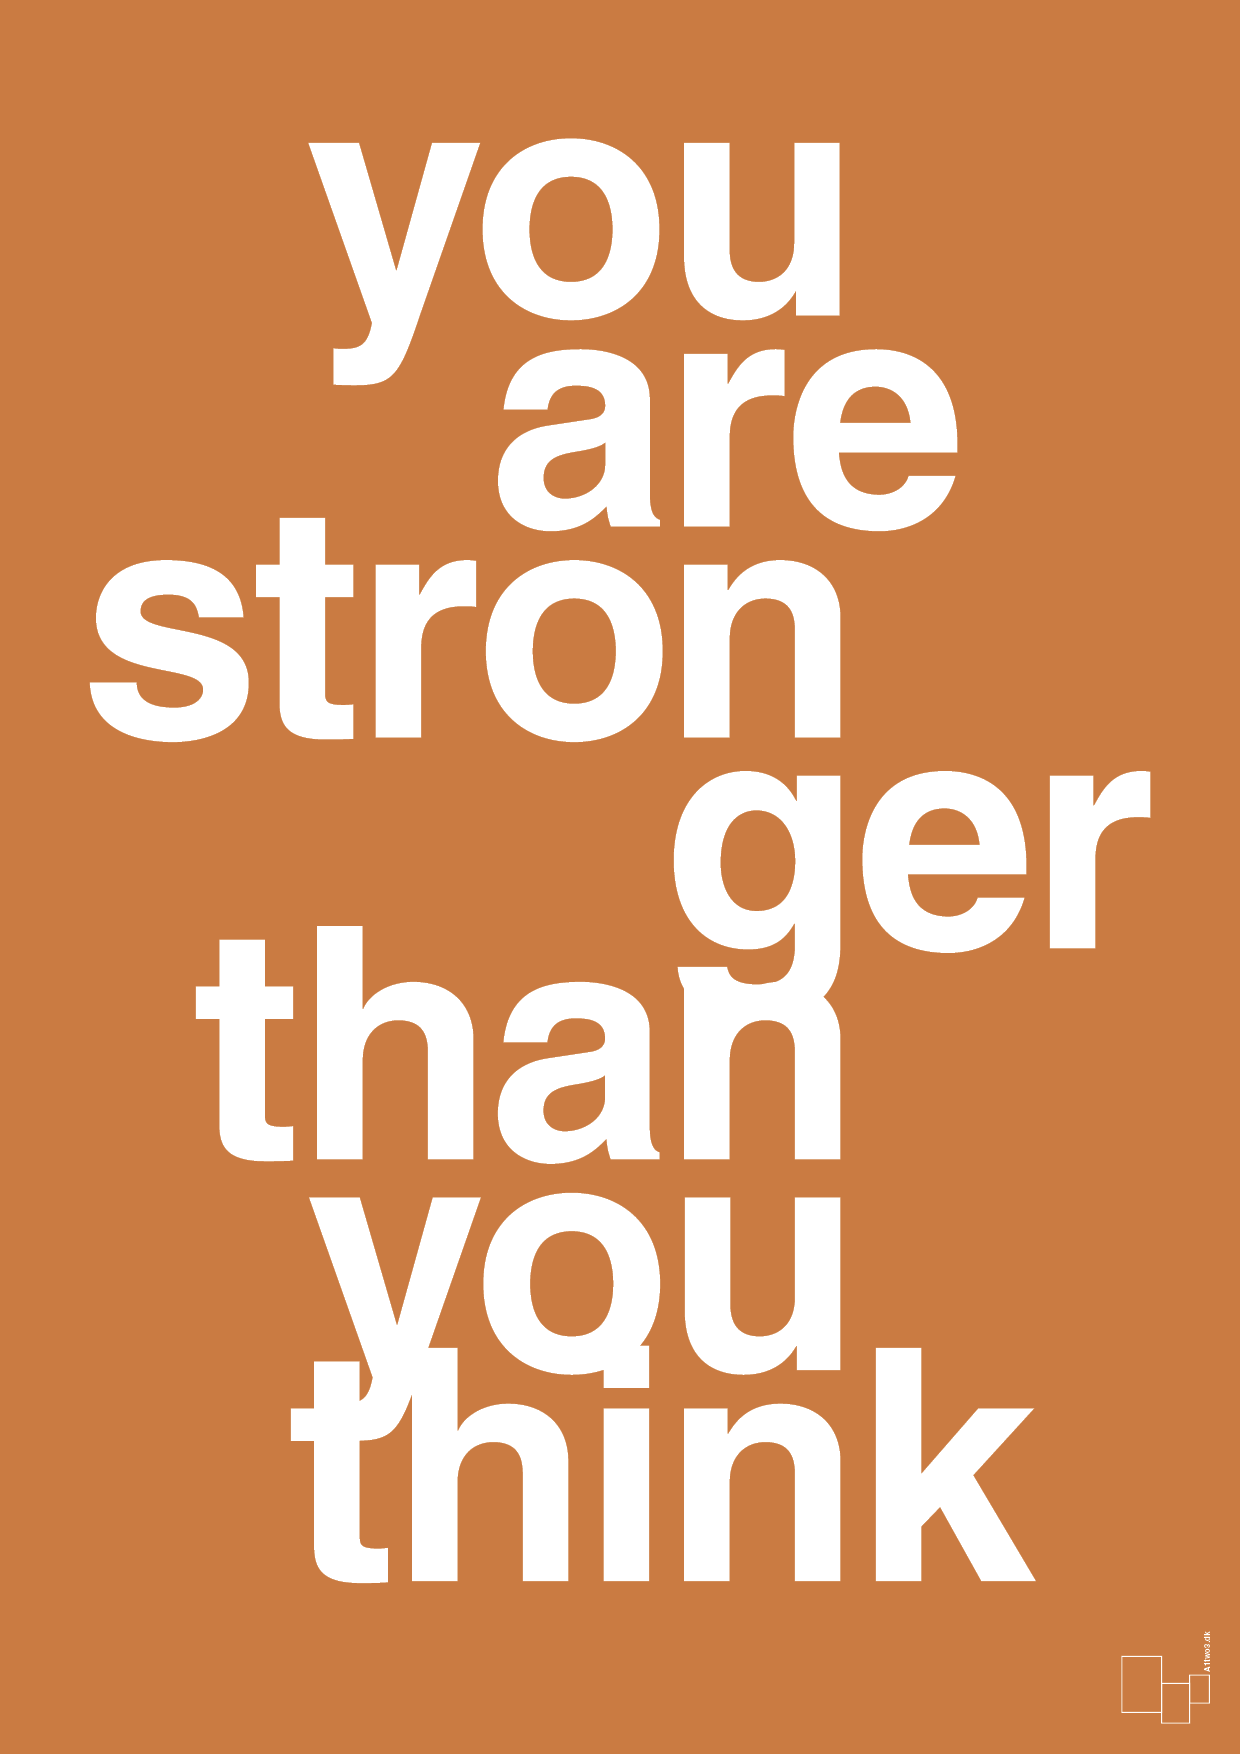 you are stronger than you think - Plakat med Sport & Fritid i Rumba Orange